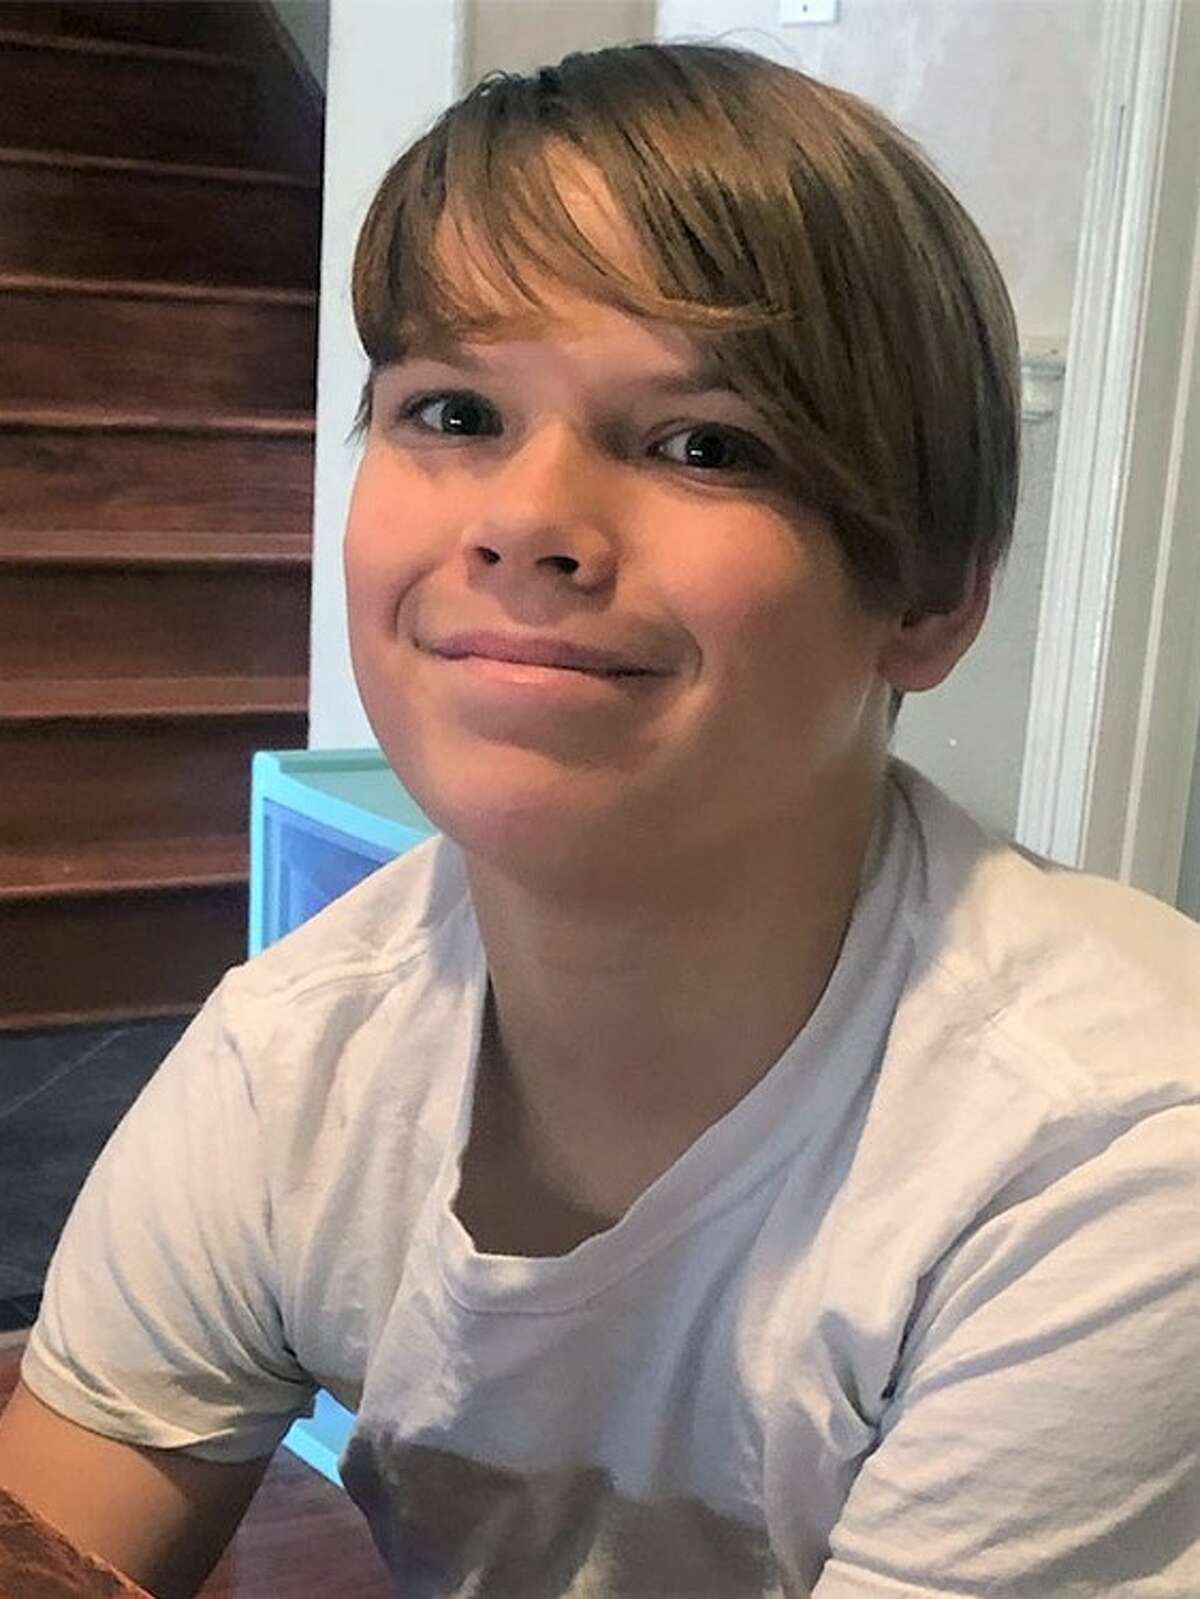 Aiden is legally cleared for adoption and listed on the Texas Adoption Resource Exchange (TARE). Visit the TARE website at https://www.dfps.state.tx.us/Application/TARE/Home.aspx/Default